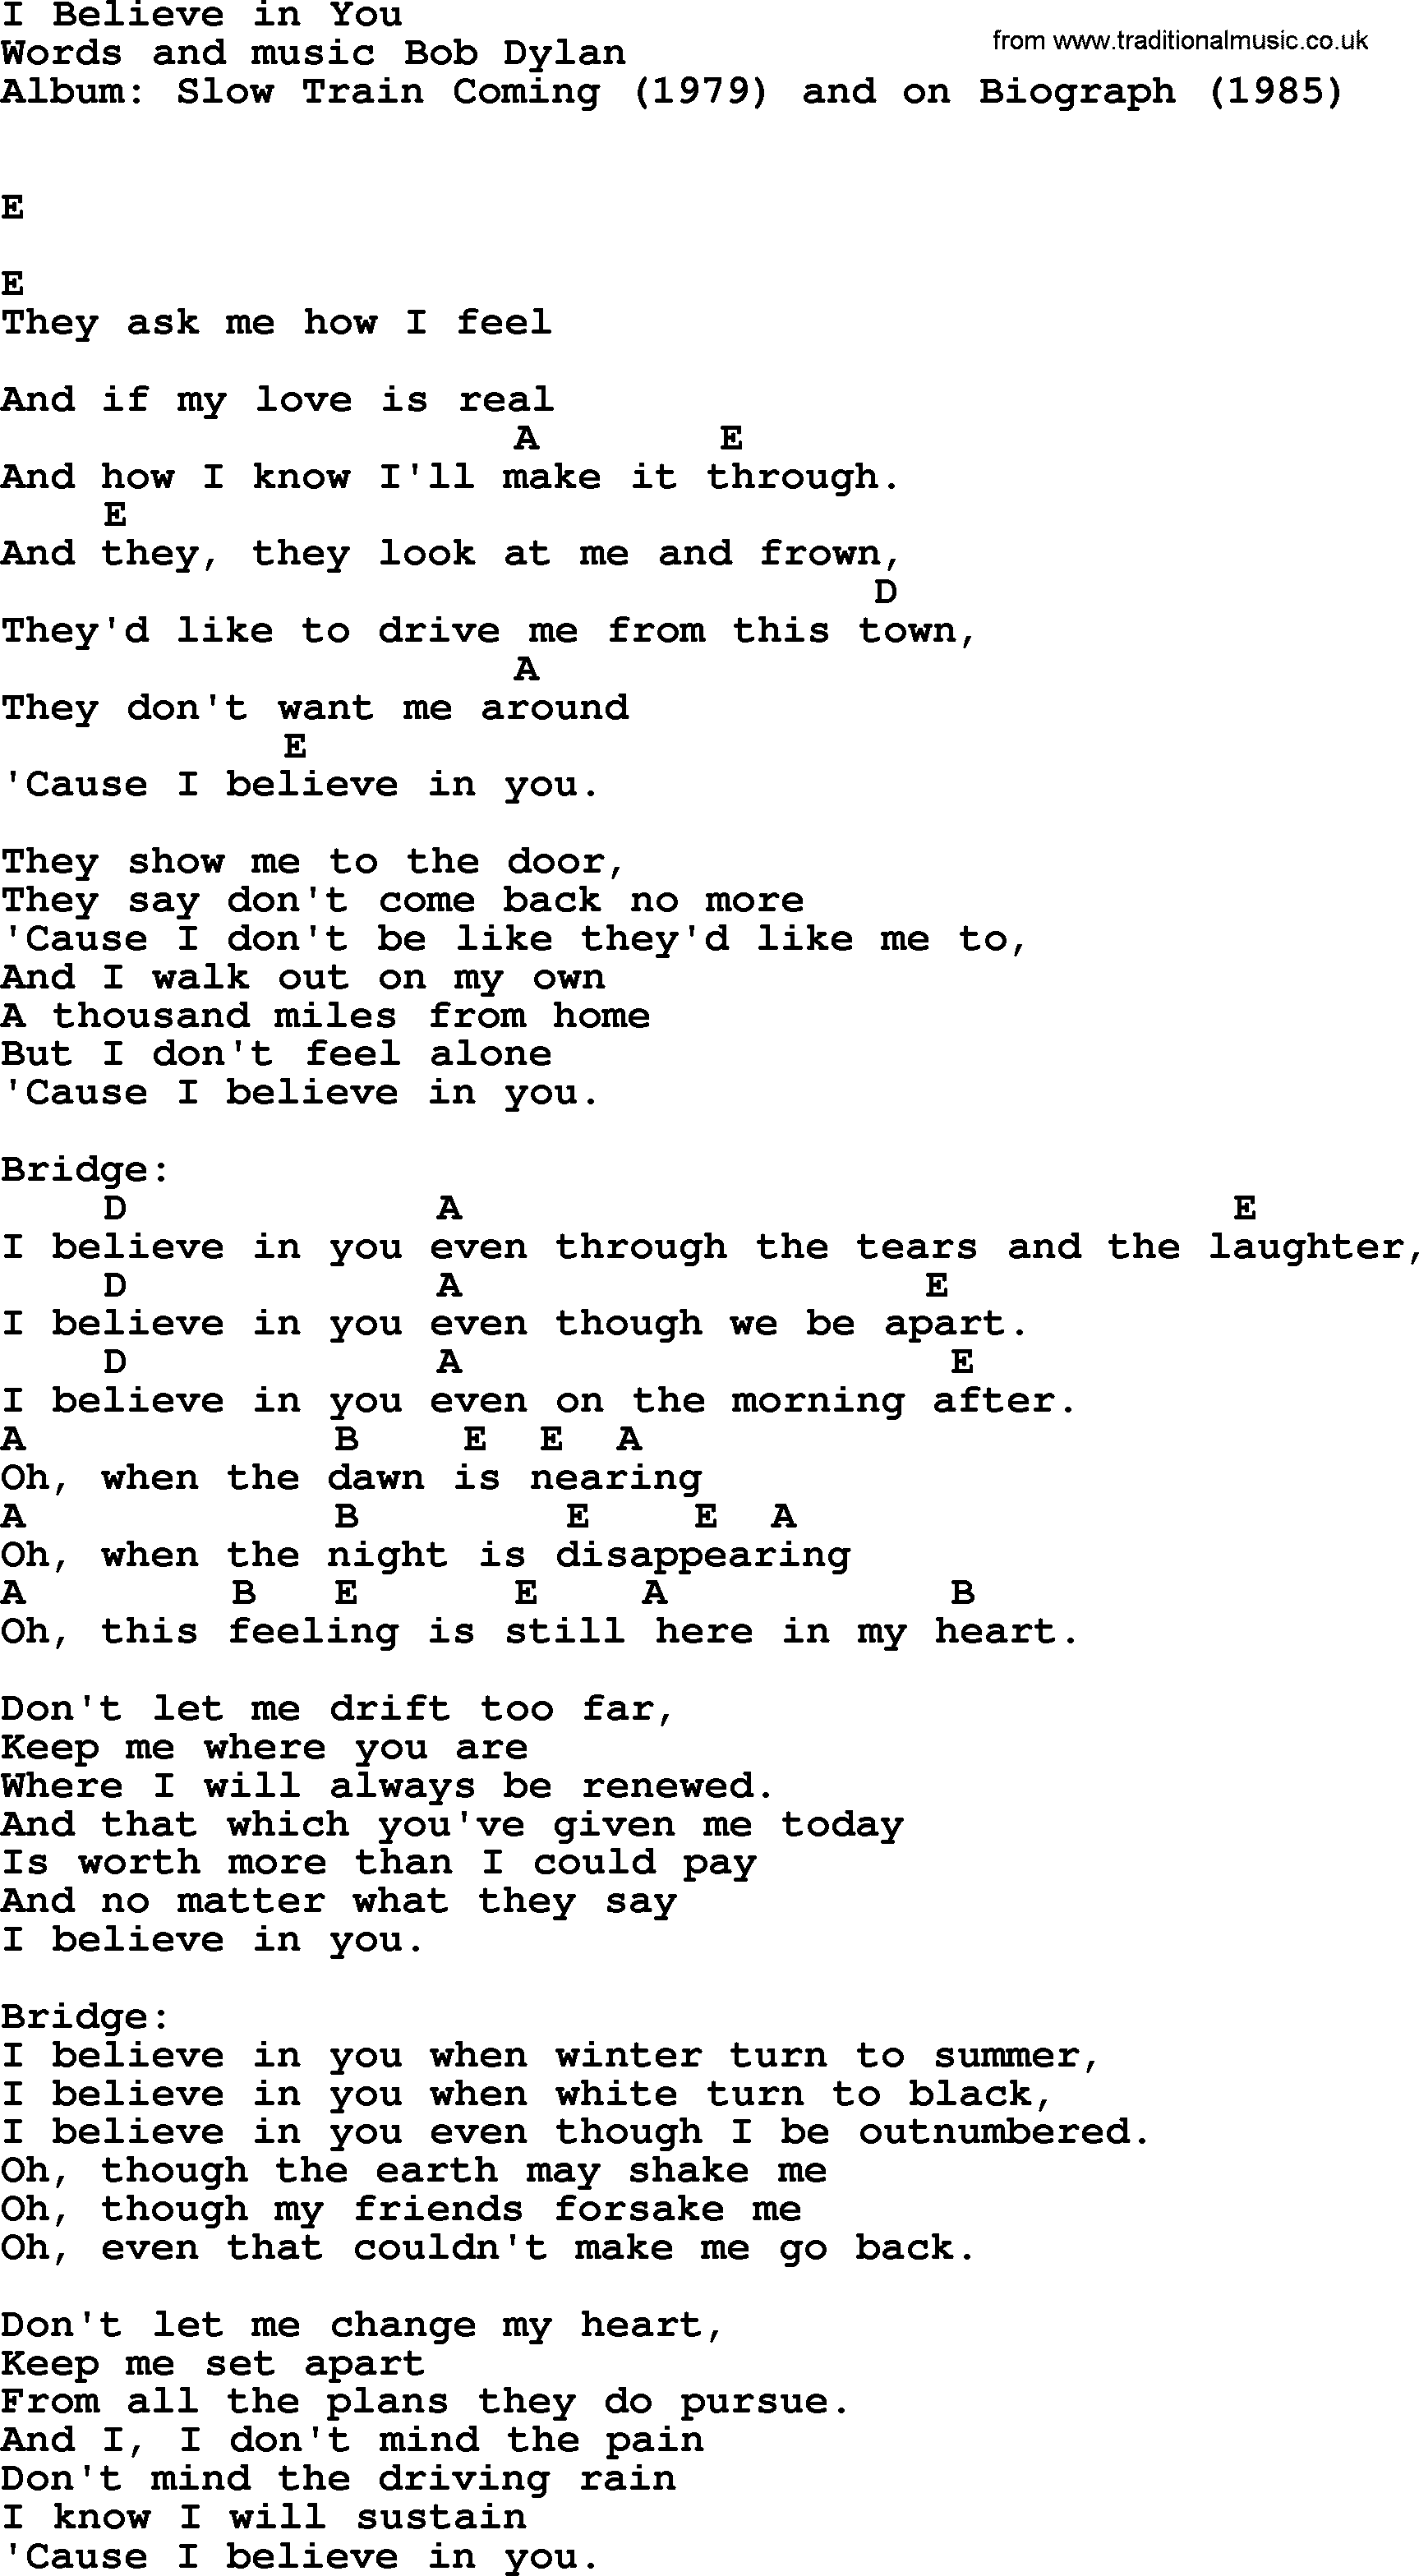 Bob Dylan song, lyrics with chords - I Believe in You